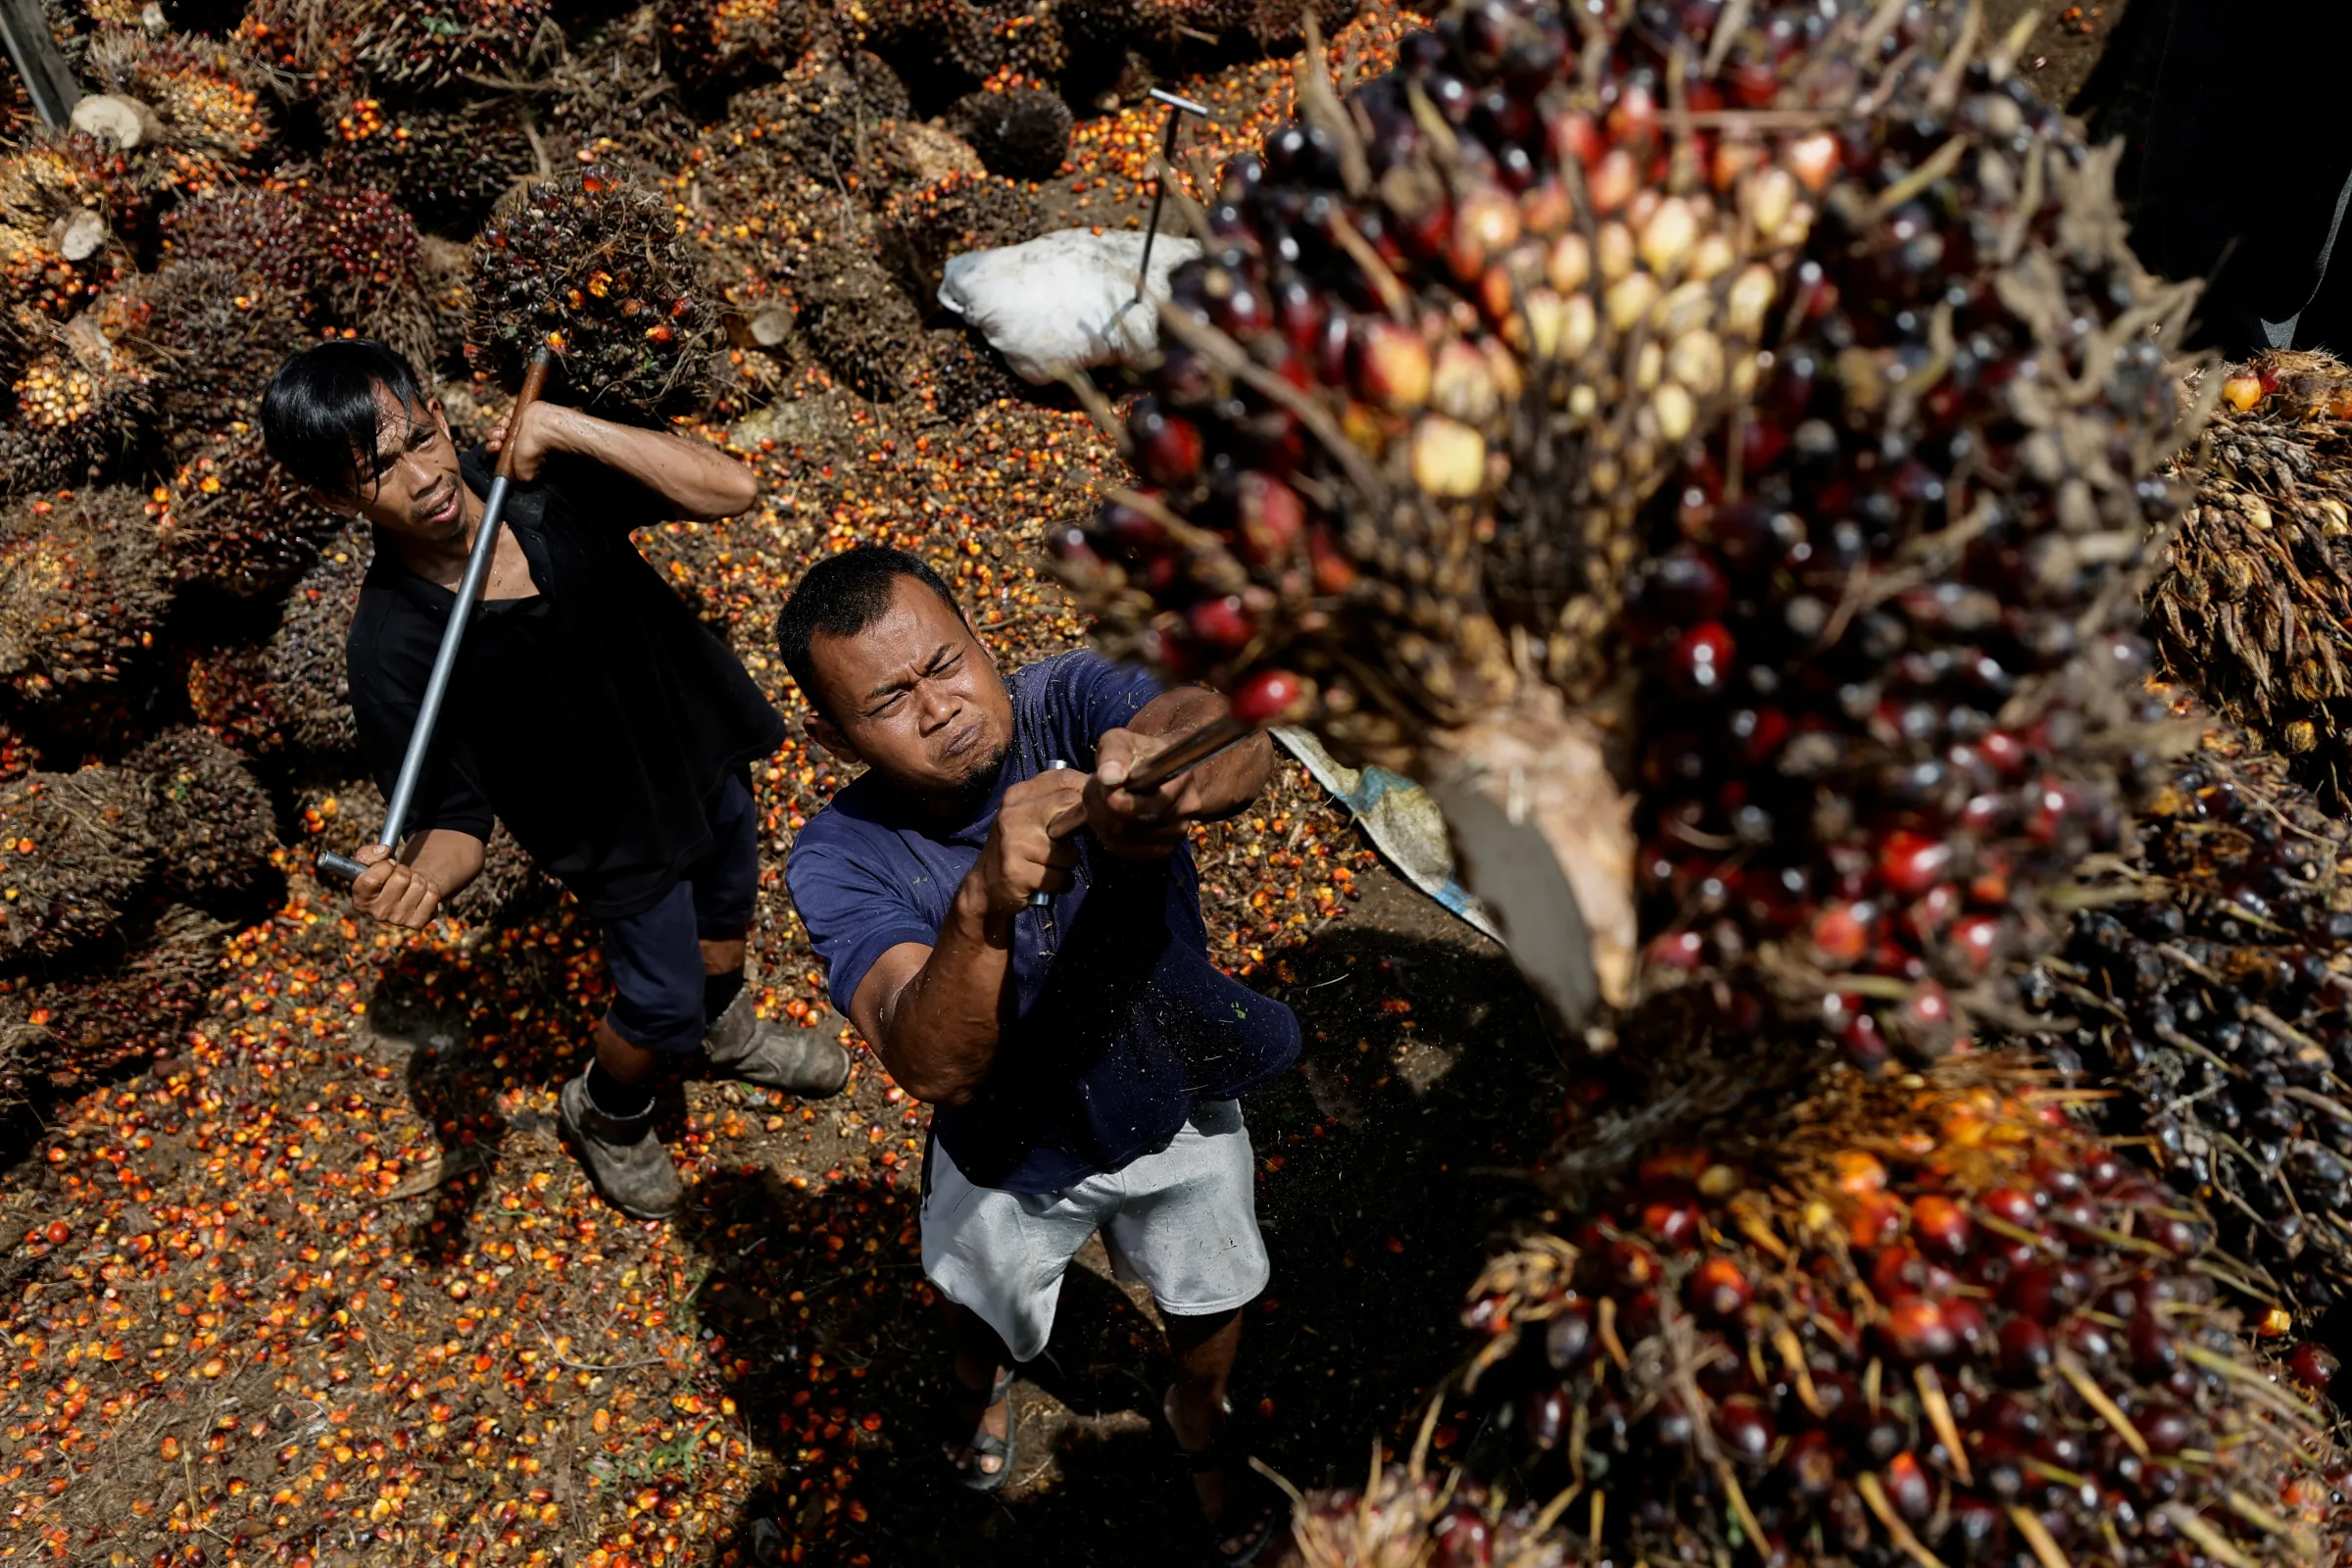 Workers load palm oil fresh fruit bunches to be transported from the collector site to CPO factories in Pekanbaru, Riau province, Indonesia, April 27, 2022